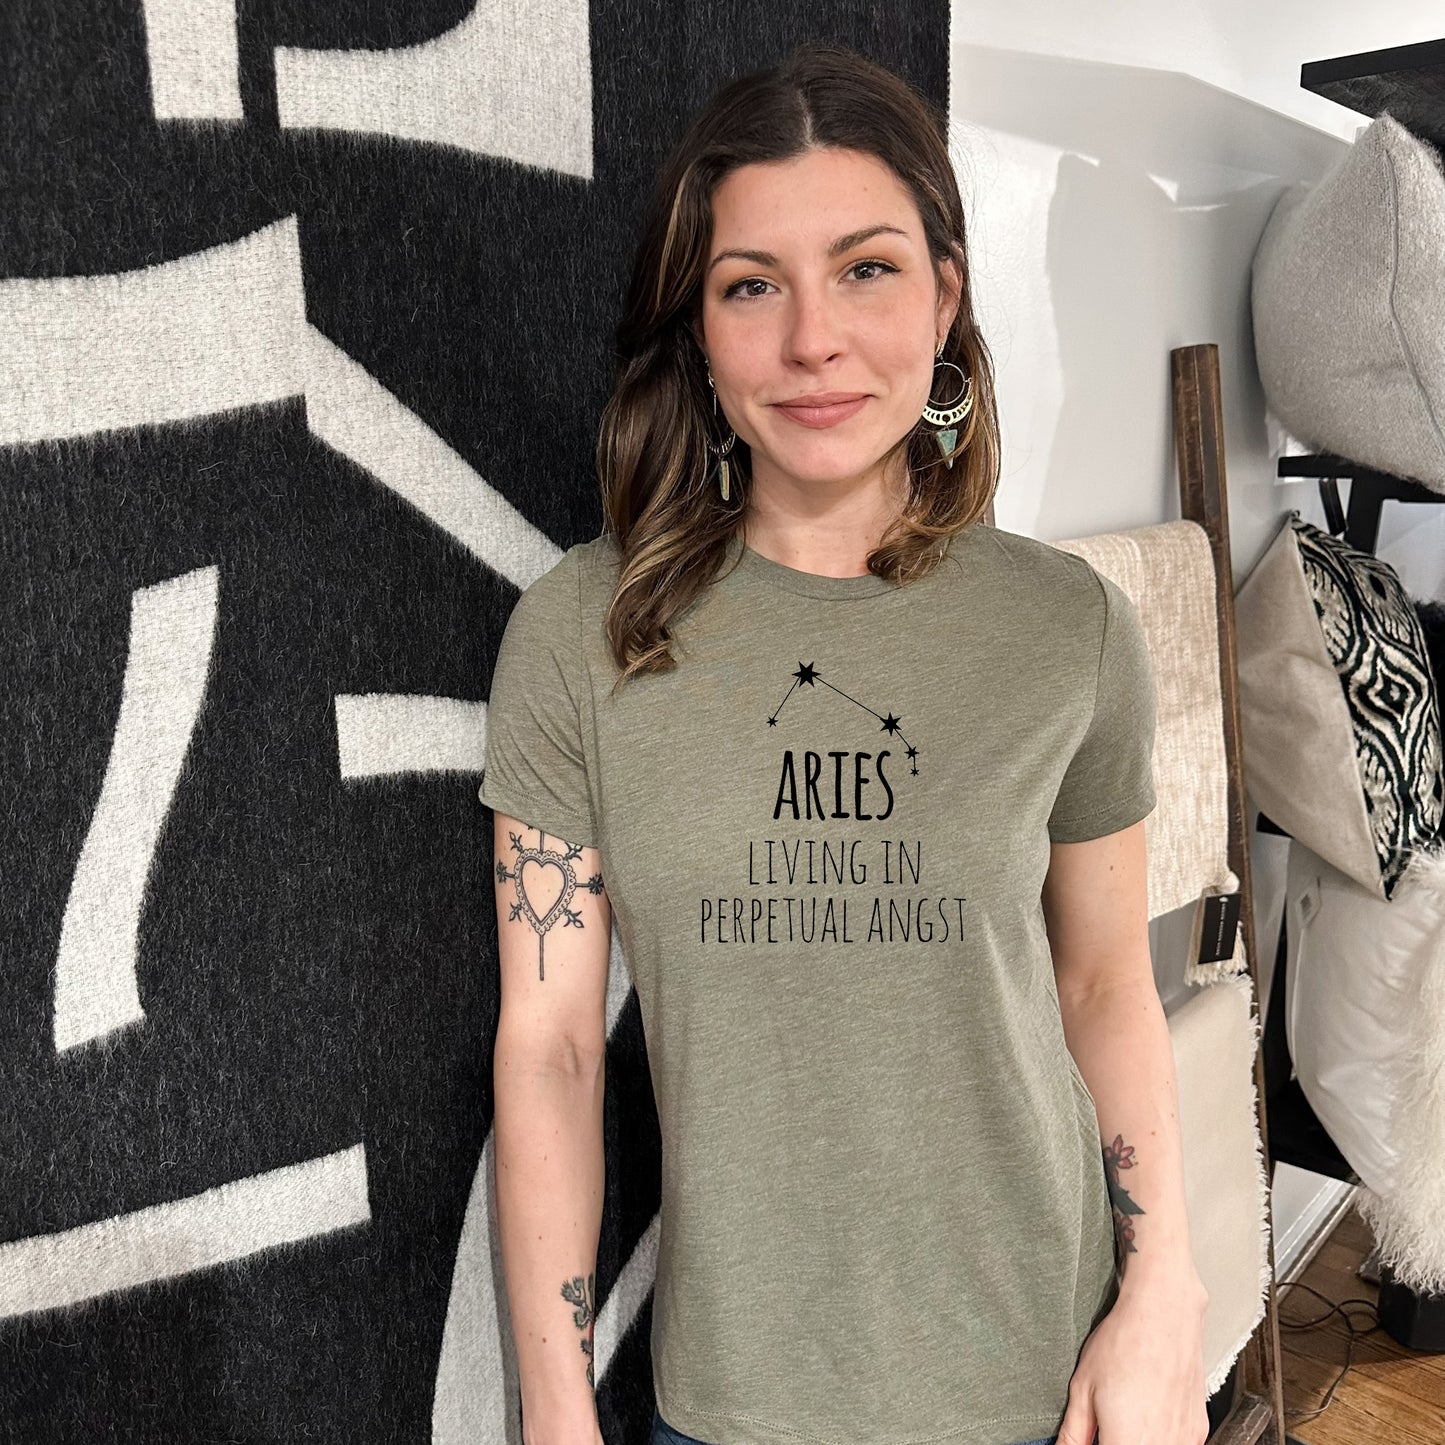 Aries - Women's Crew Tee - Olive or Dusty Blue